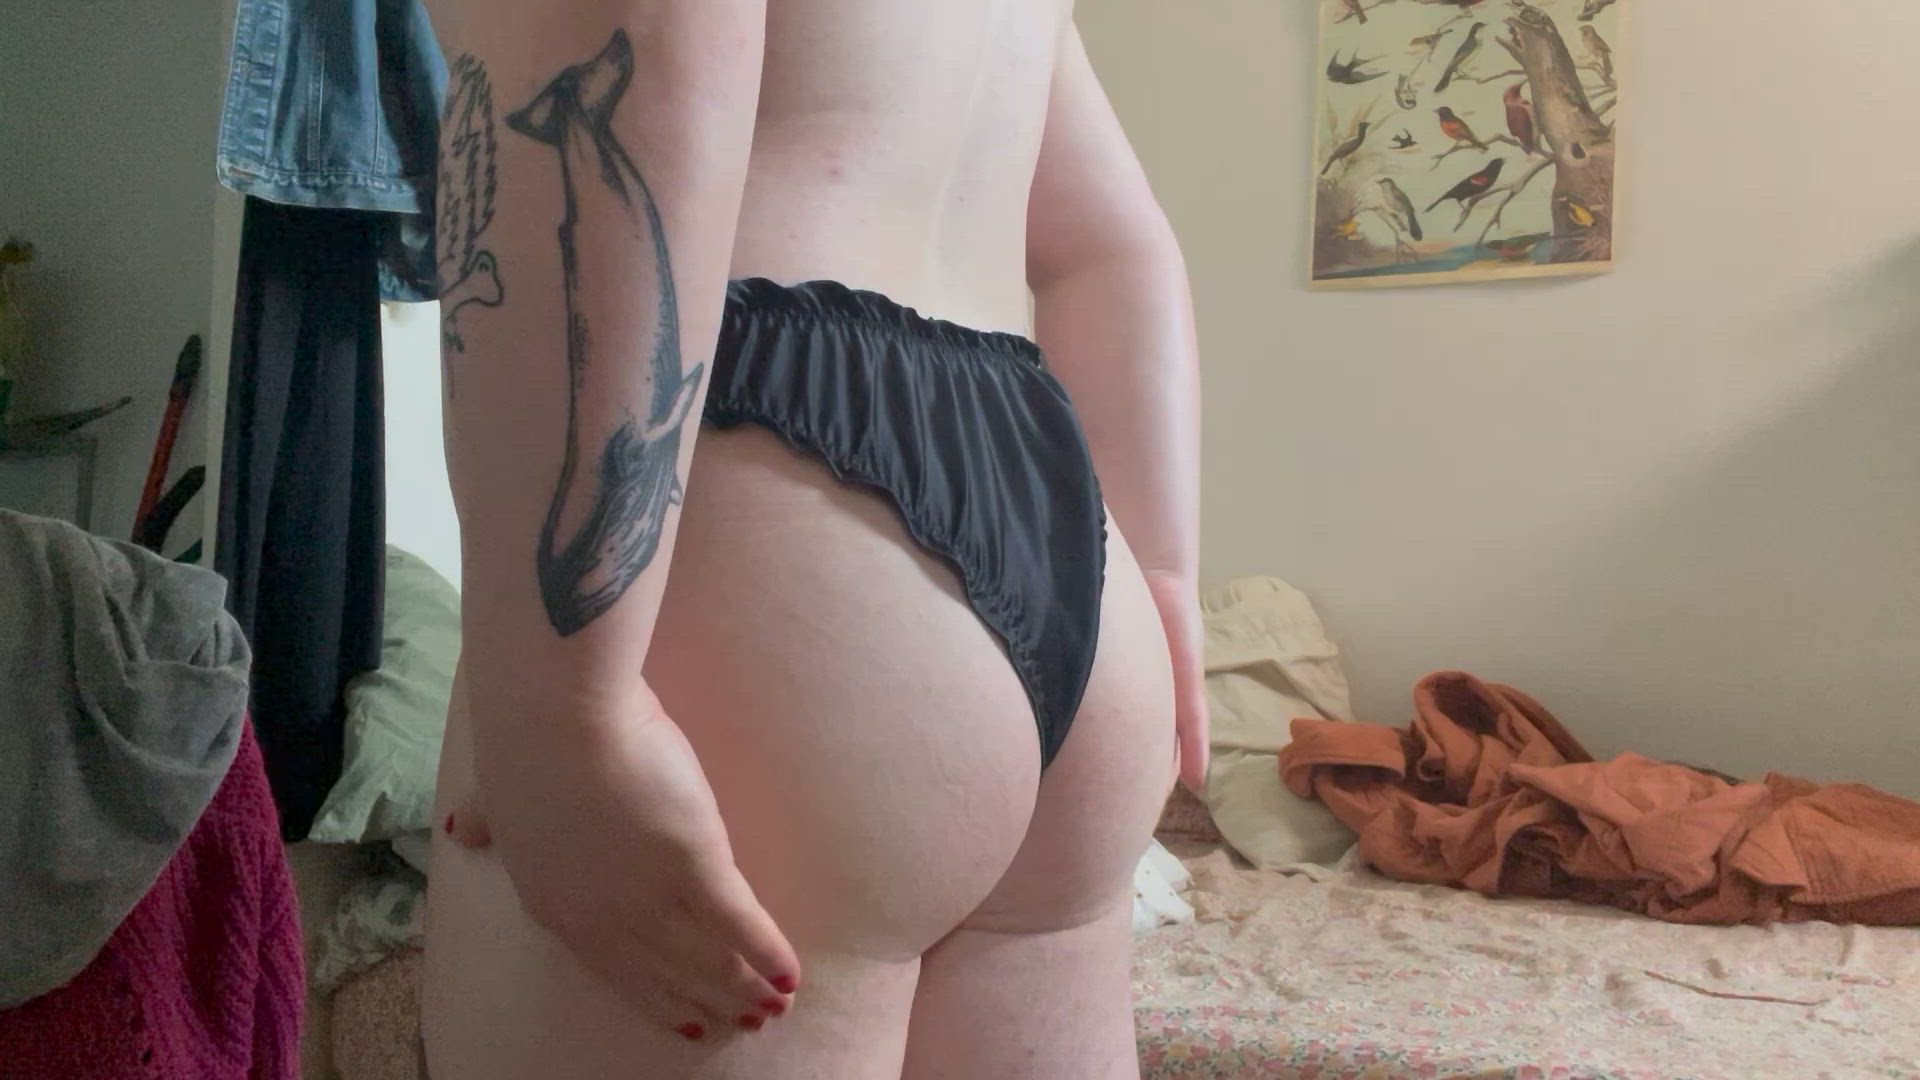 Booty porn video with onlyfans model clementinewax <strong>@clementinecandle</strong>